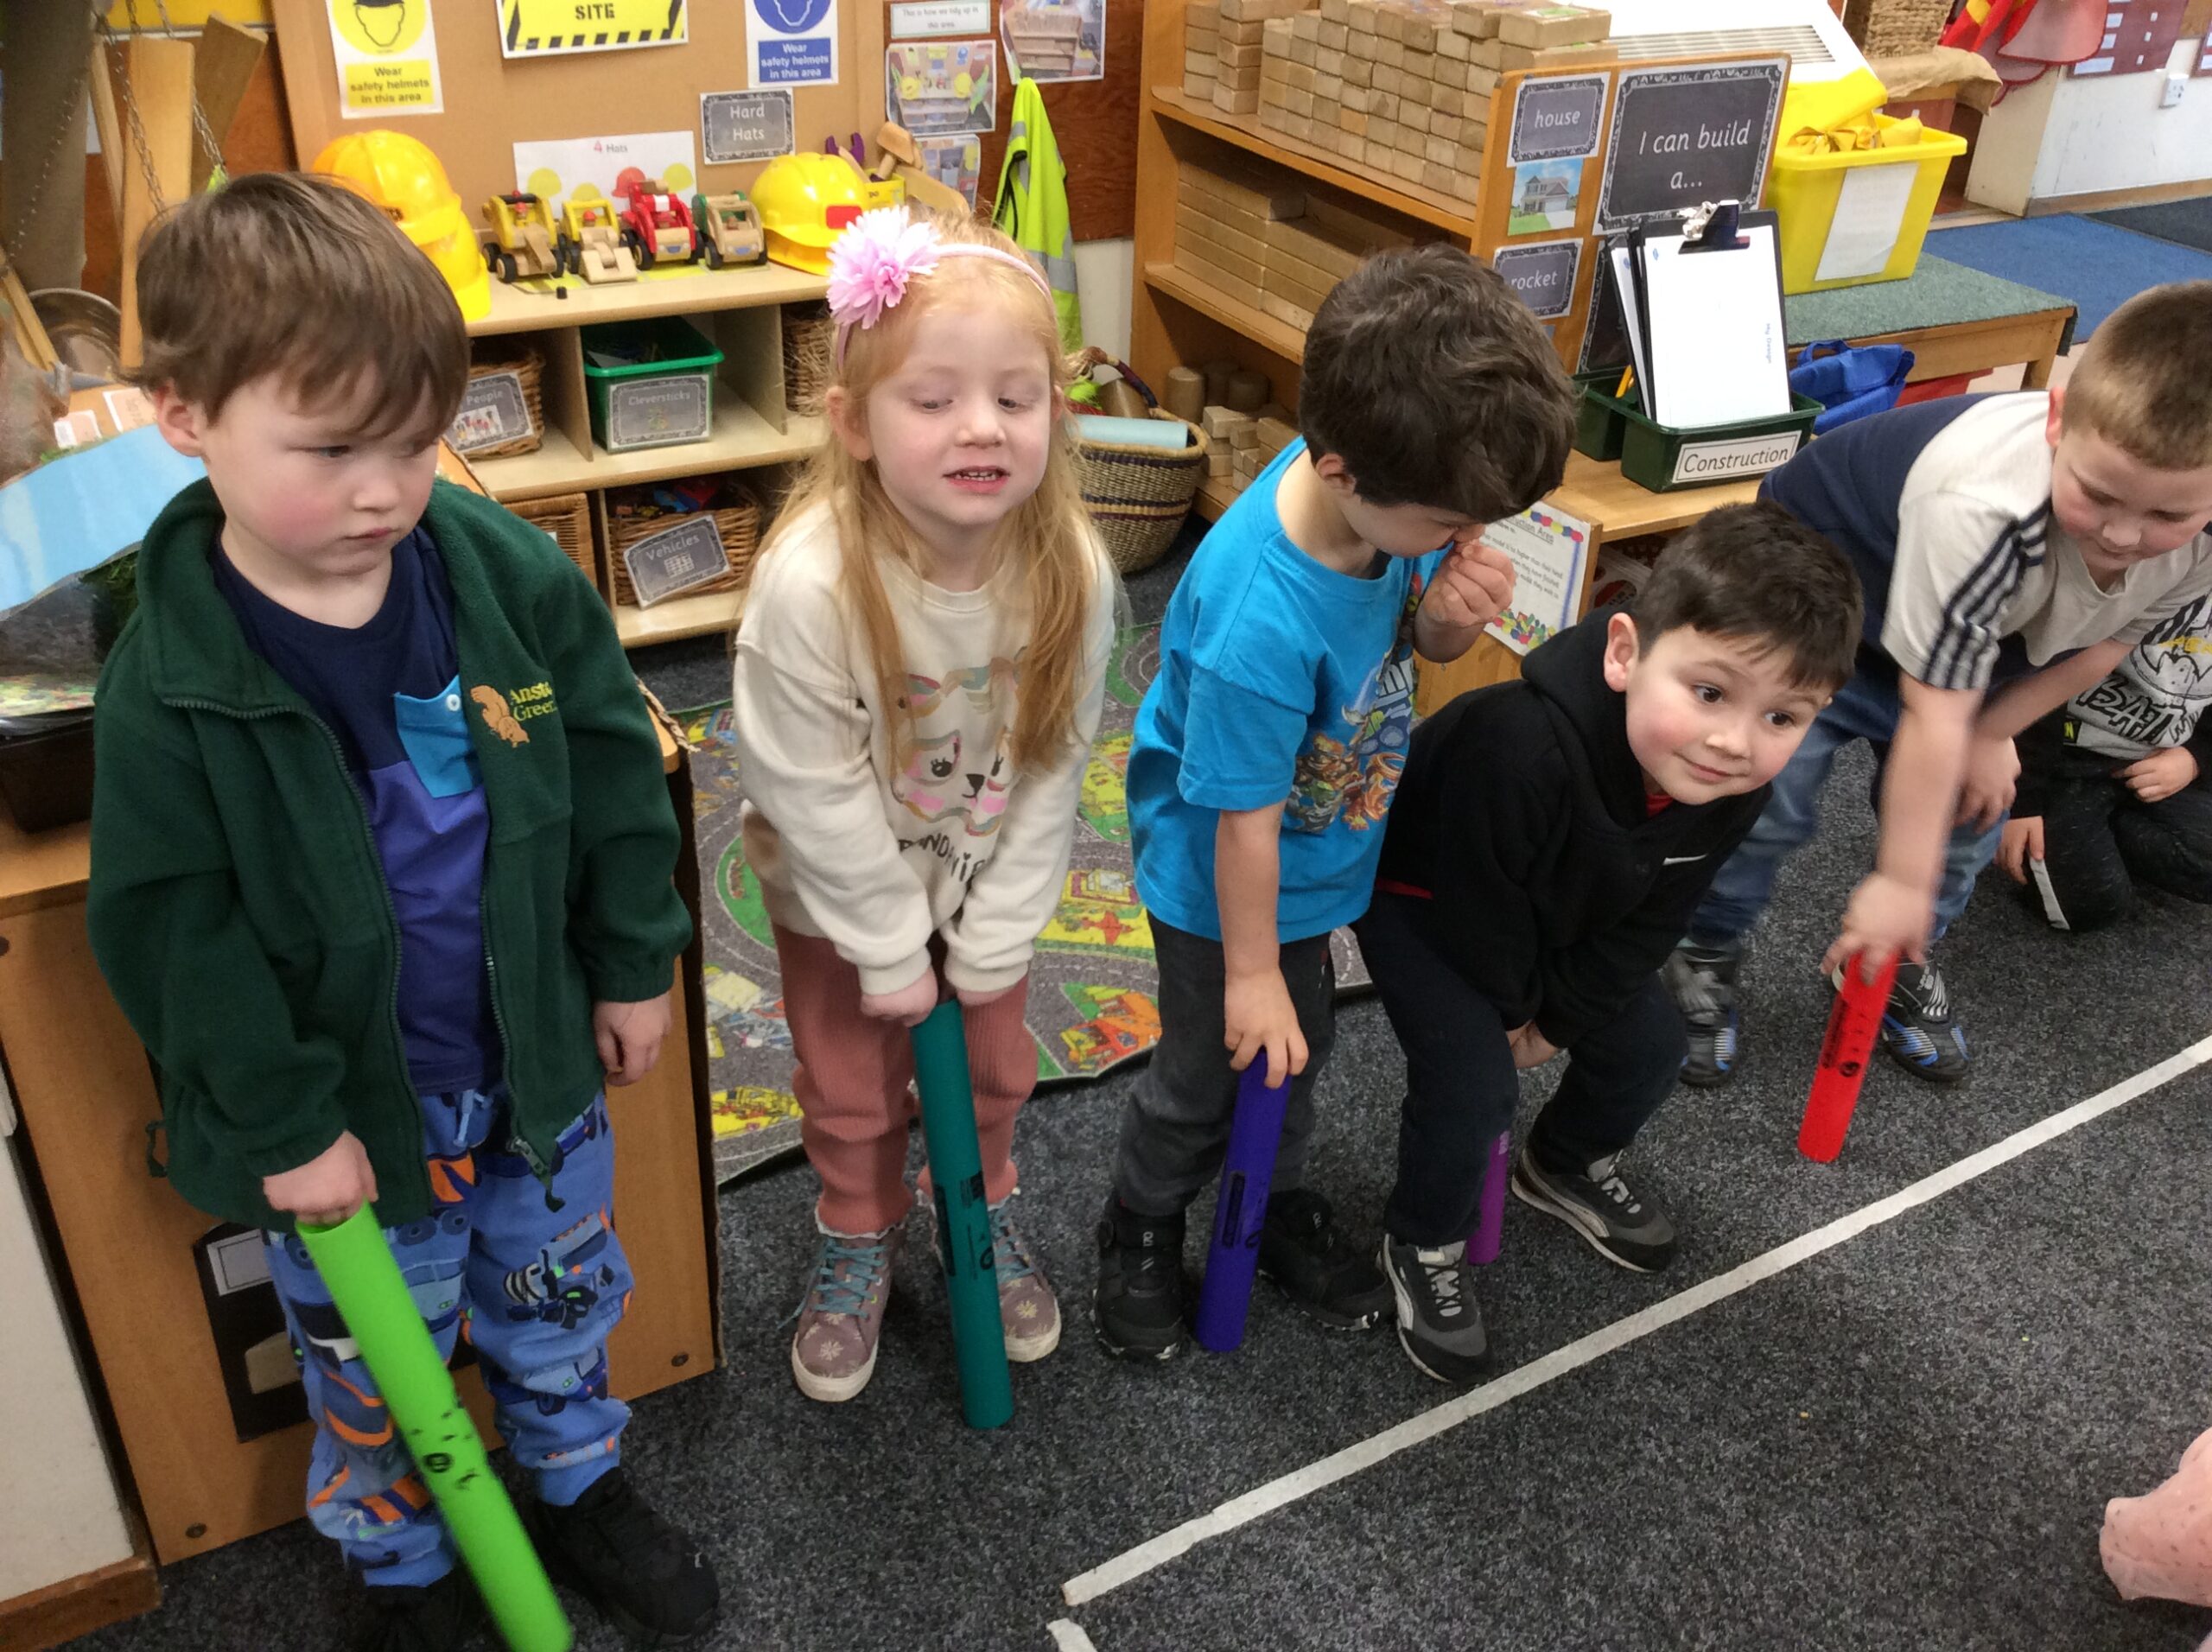 Boomwhacker Fun – Tried and Tested Once – Round 2